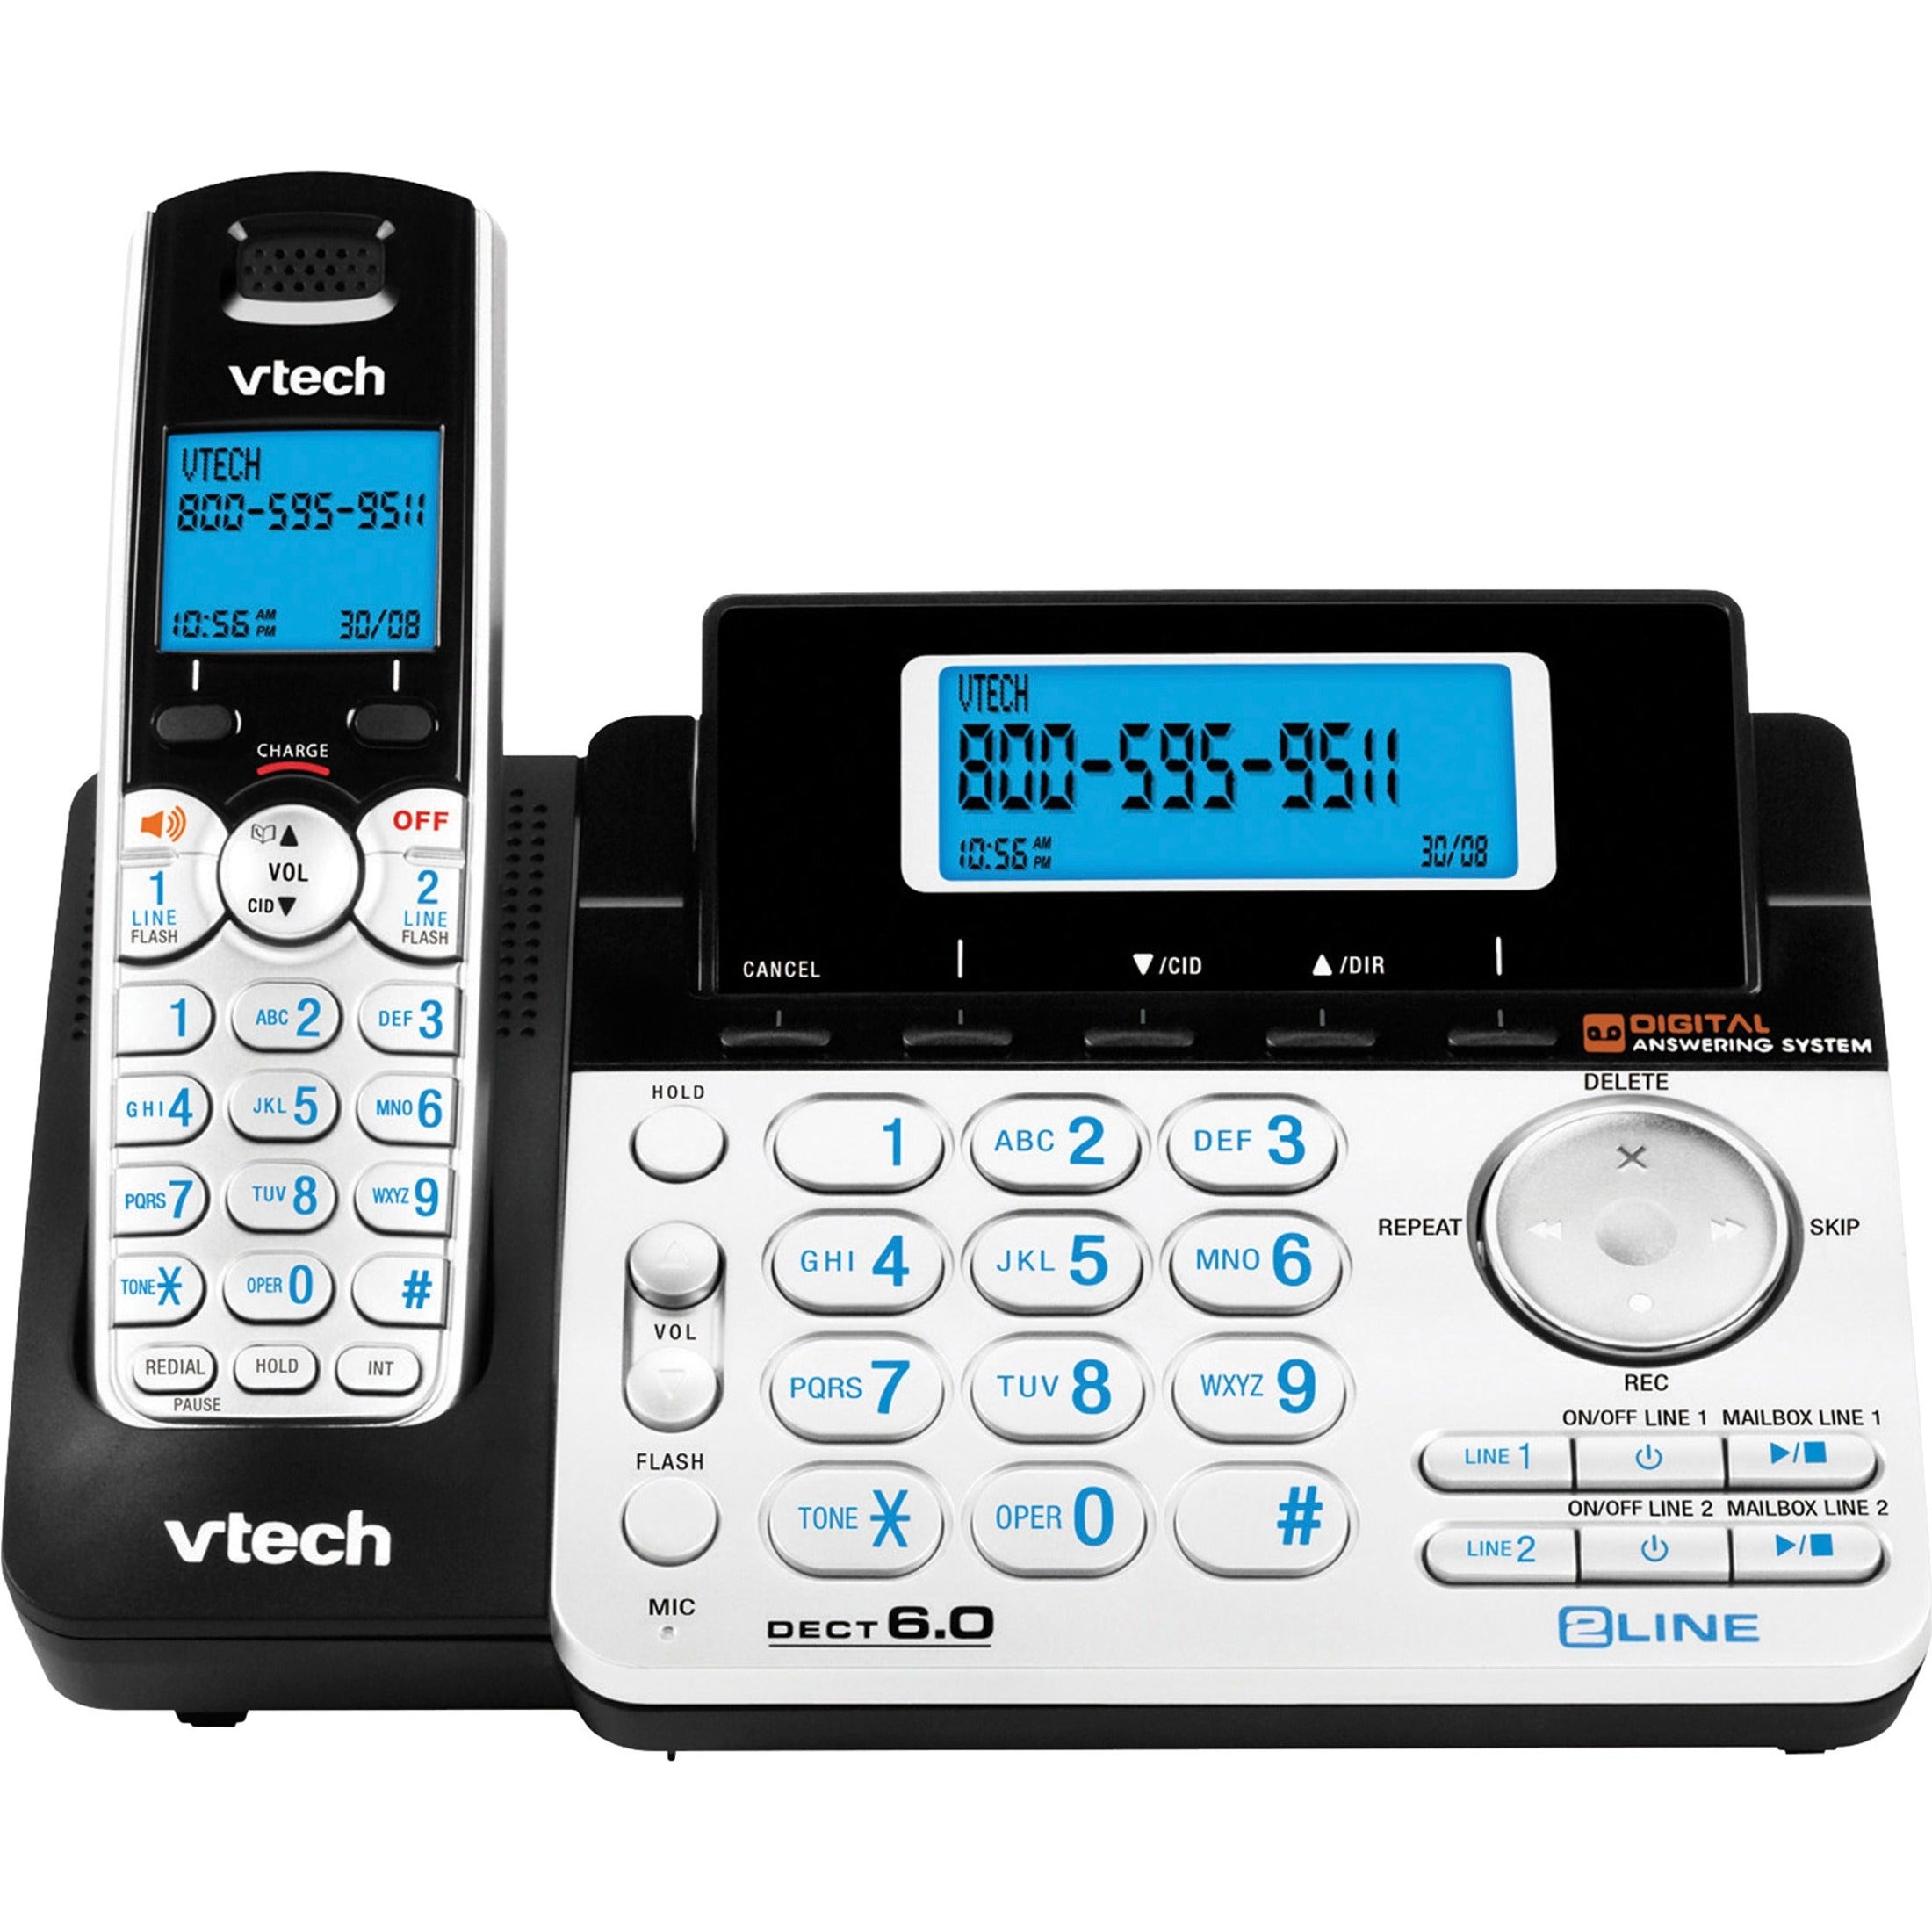 VTech DS6151 DECT 6.0 Cordless Phone - Silver, Caller ID Memory, Phone Book/Directory Memory, 1 Year Limited Warranty, Energy Star Certified